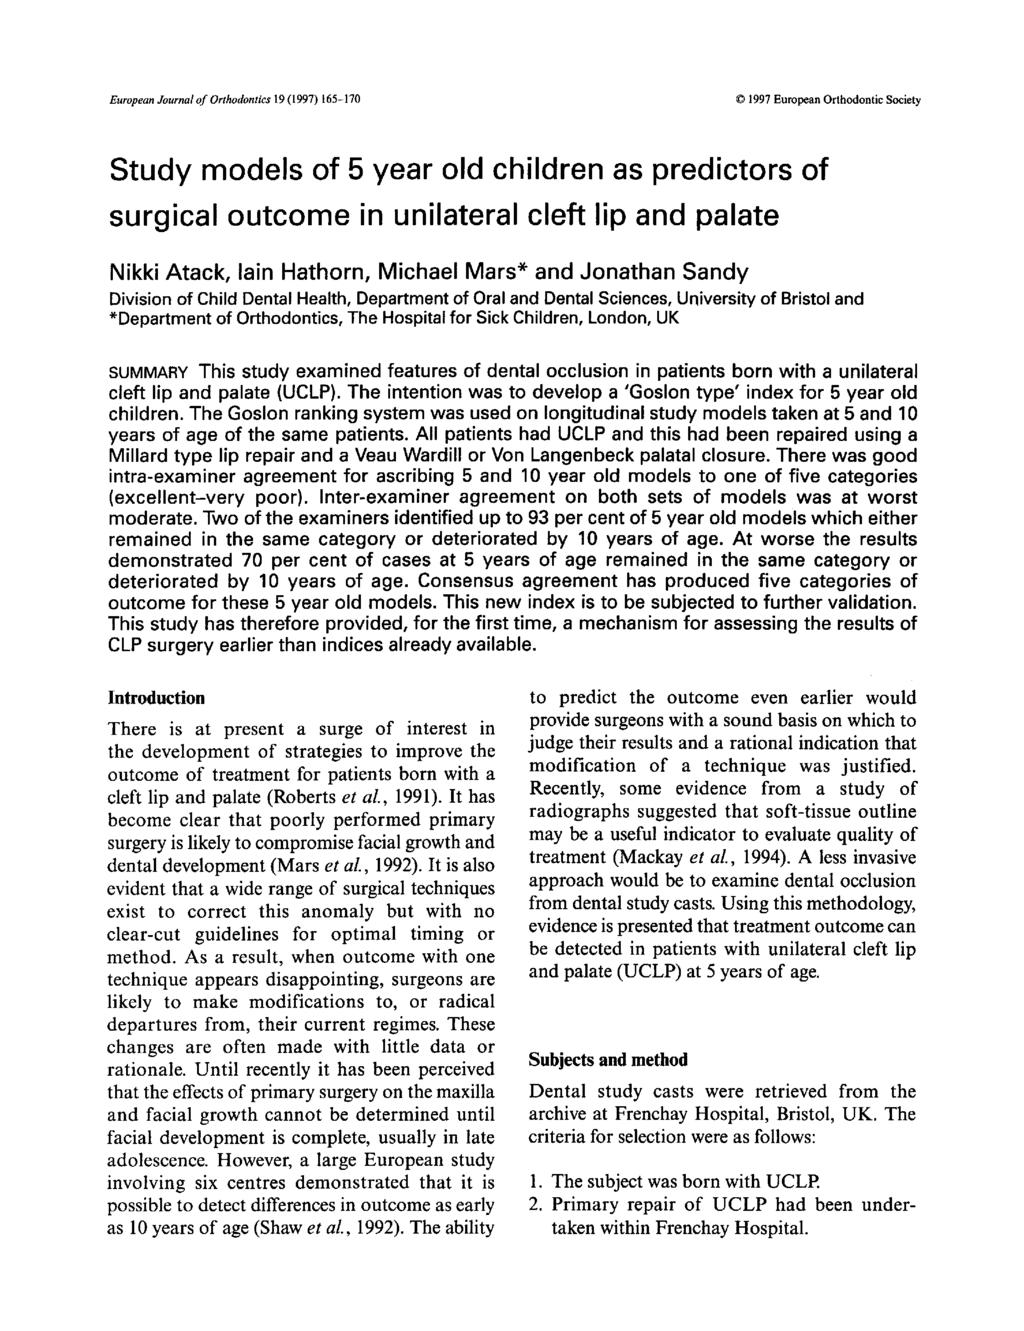 European Journal of Orthodontics 19 (1997) 165-170 1997 European Orthodontic Society Study models of 5 year old children as predictors of surgical outcome in unilateral cleft lip and palate Nikki